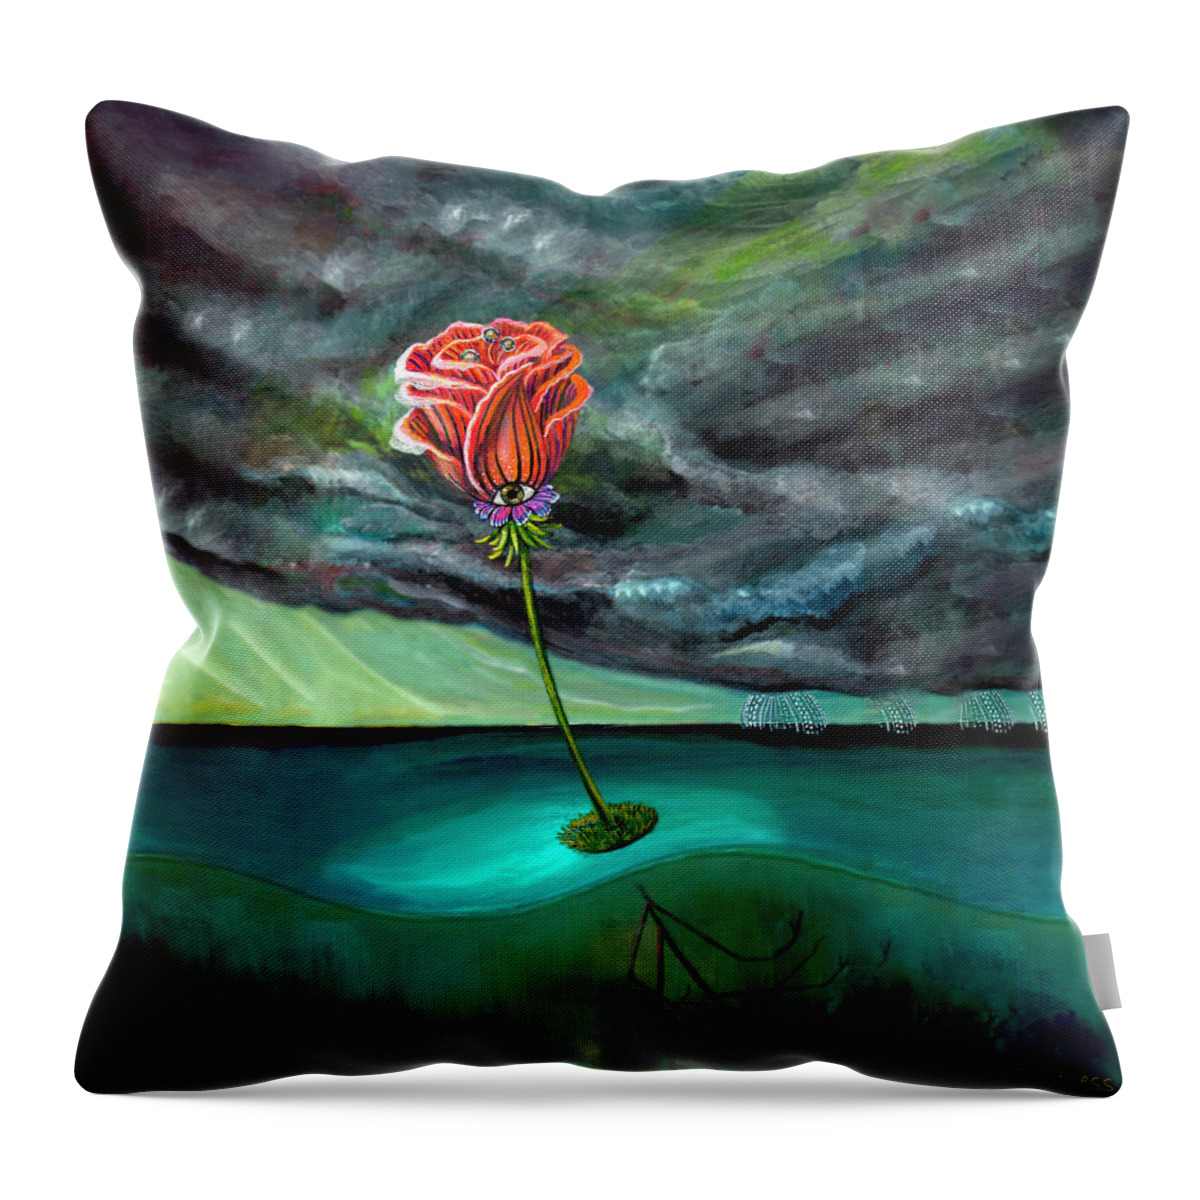 Optimistic Throw Pillow featuring the painting Searching by Mindy Huntress